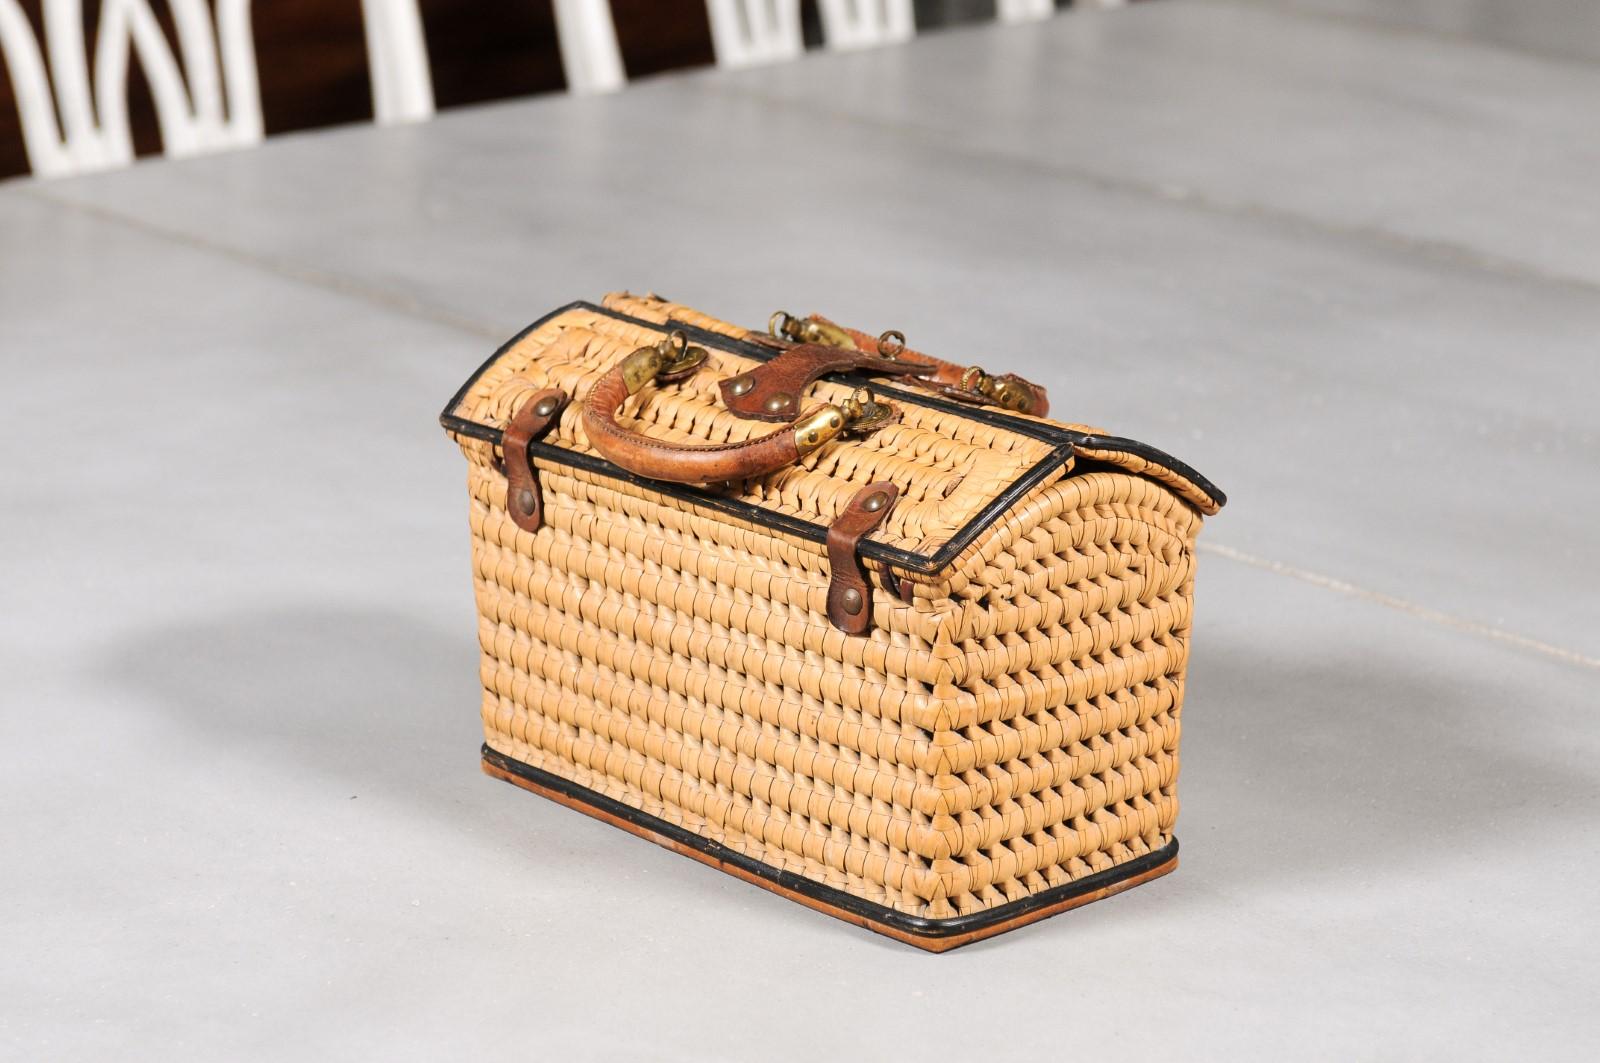 A Swedish rectangular shaped wicker basket from the late 19th century, with leather straps, slanted lid and small handles. Charming us with its rustic appearance, this Swedish basket features a slanted lid opening thanks to a single leather strap to